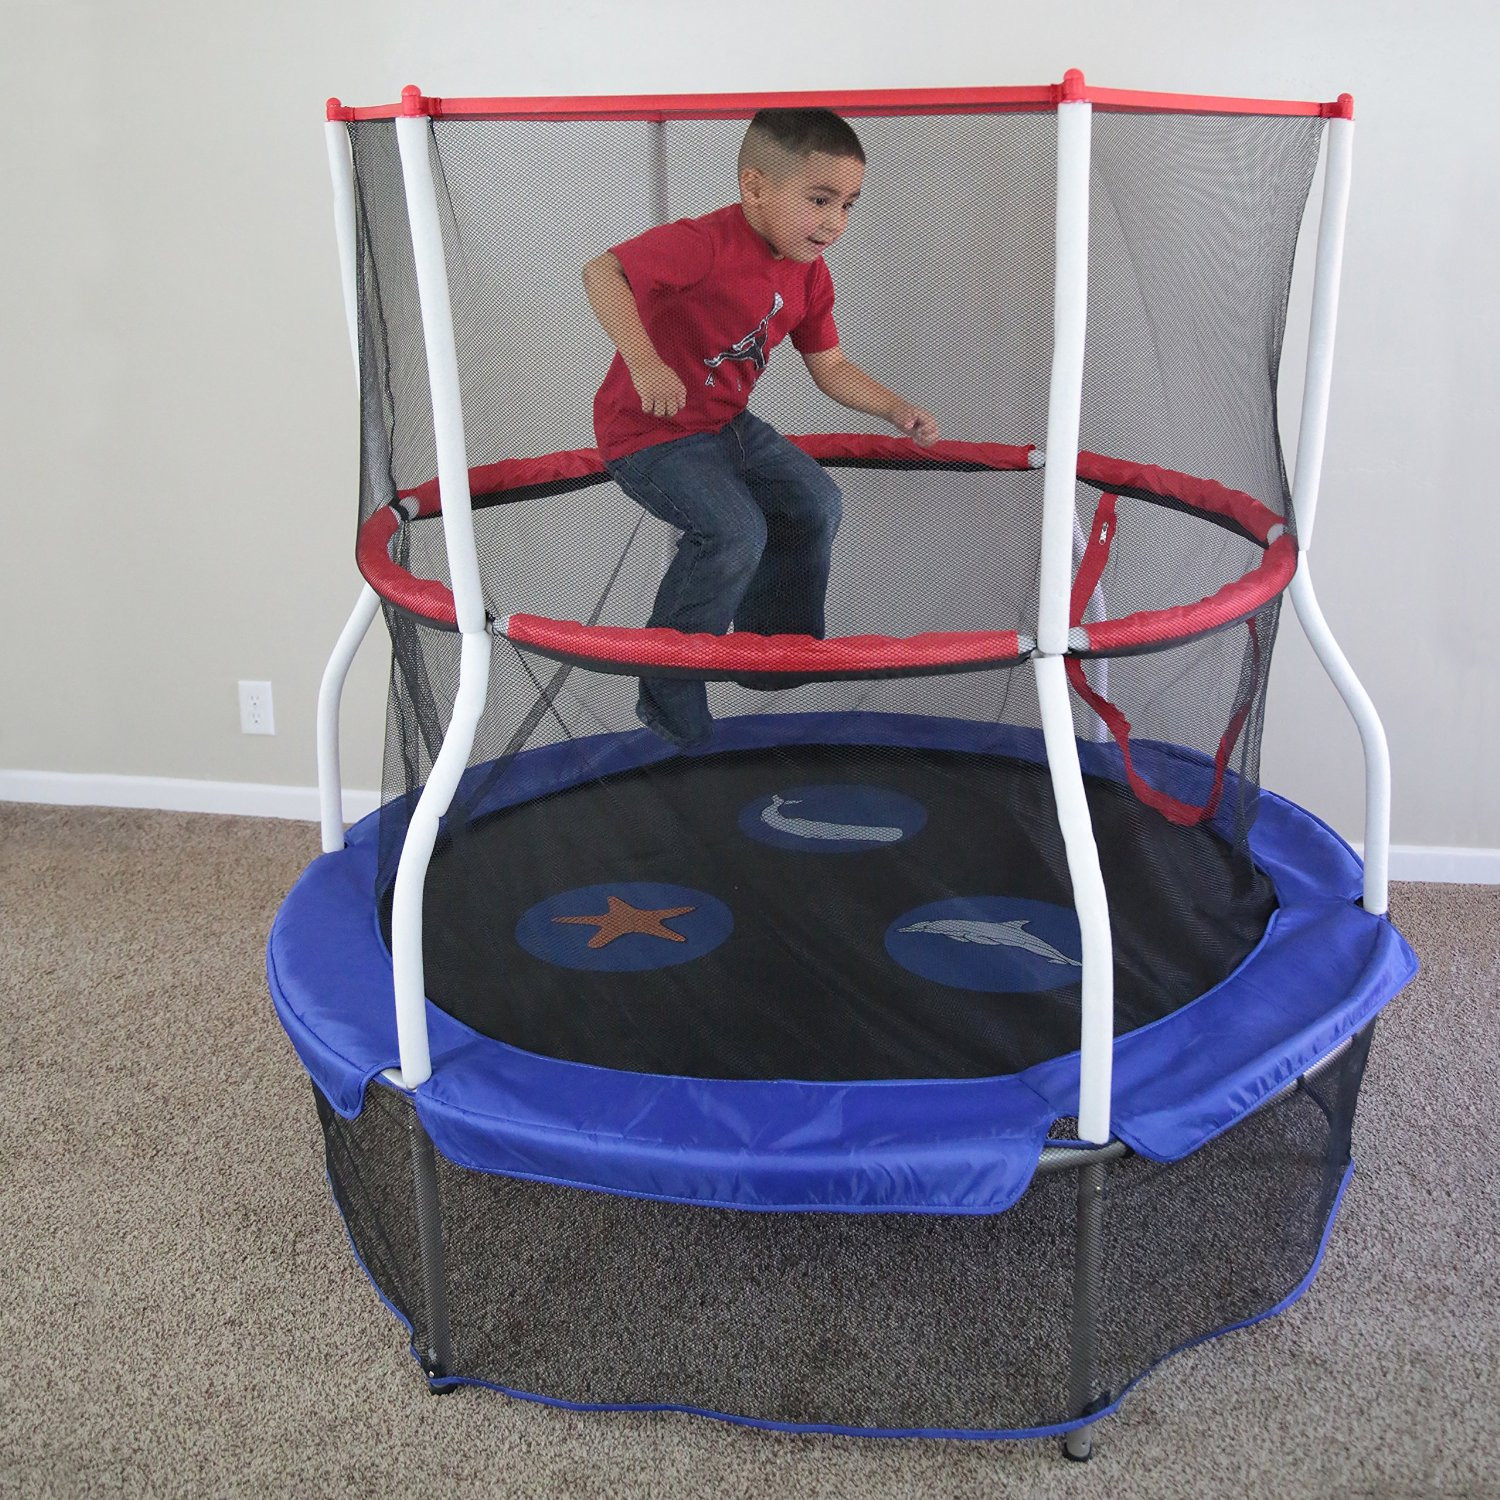 Indoor Kids Trampoline
 Best Trampoline for Kids Our Top 3 Picks and Reviews